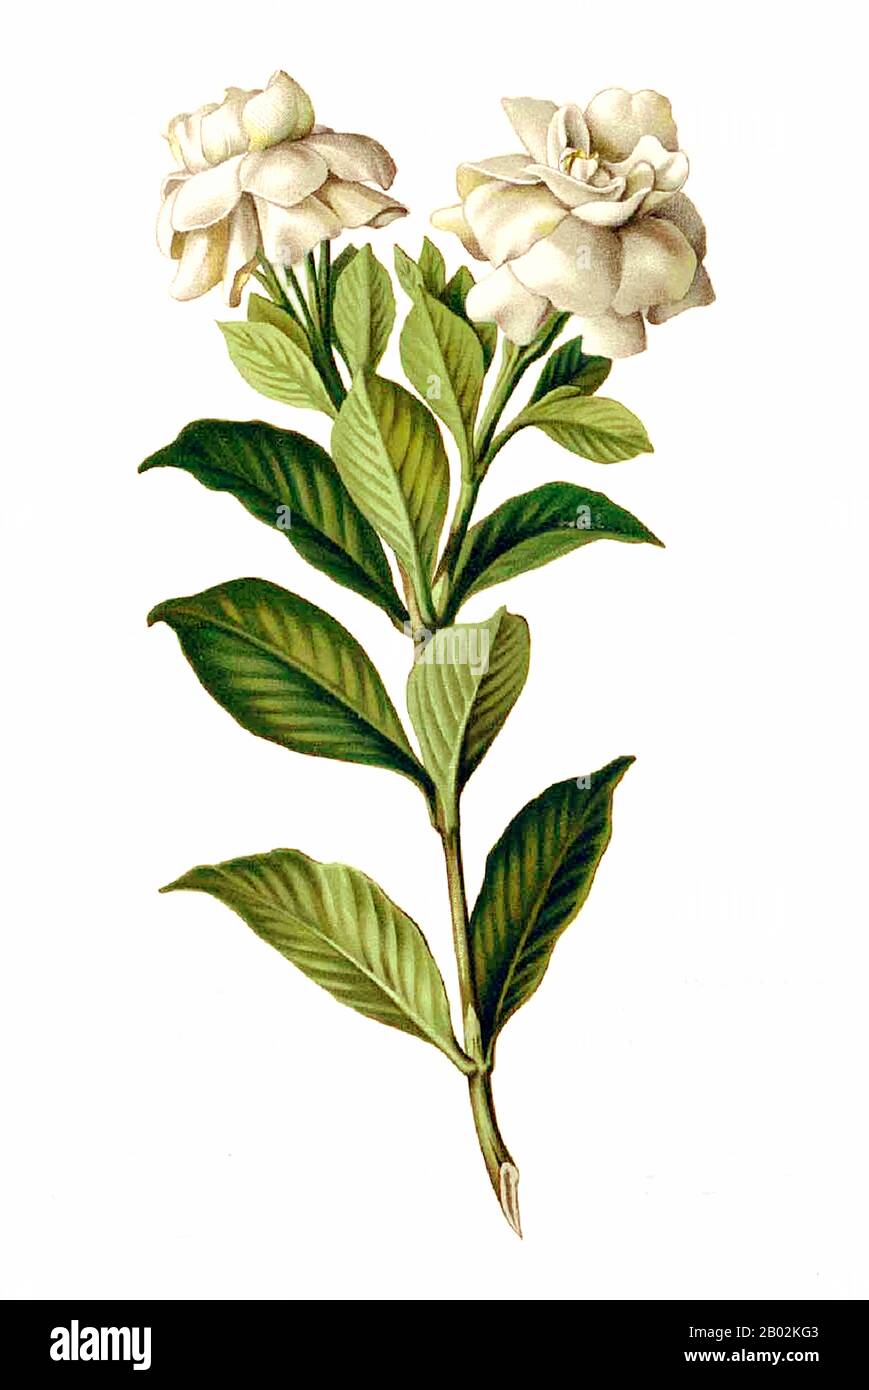 Gardenia jasminoides, (common gardenia, cape jasmine or cape jessamine) is  an evergreen flowering plant of the family Rubiaceae. It originated in Asia  and is most commonly found growing wild in Vietnam, Southern